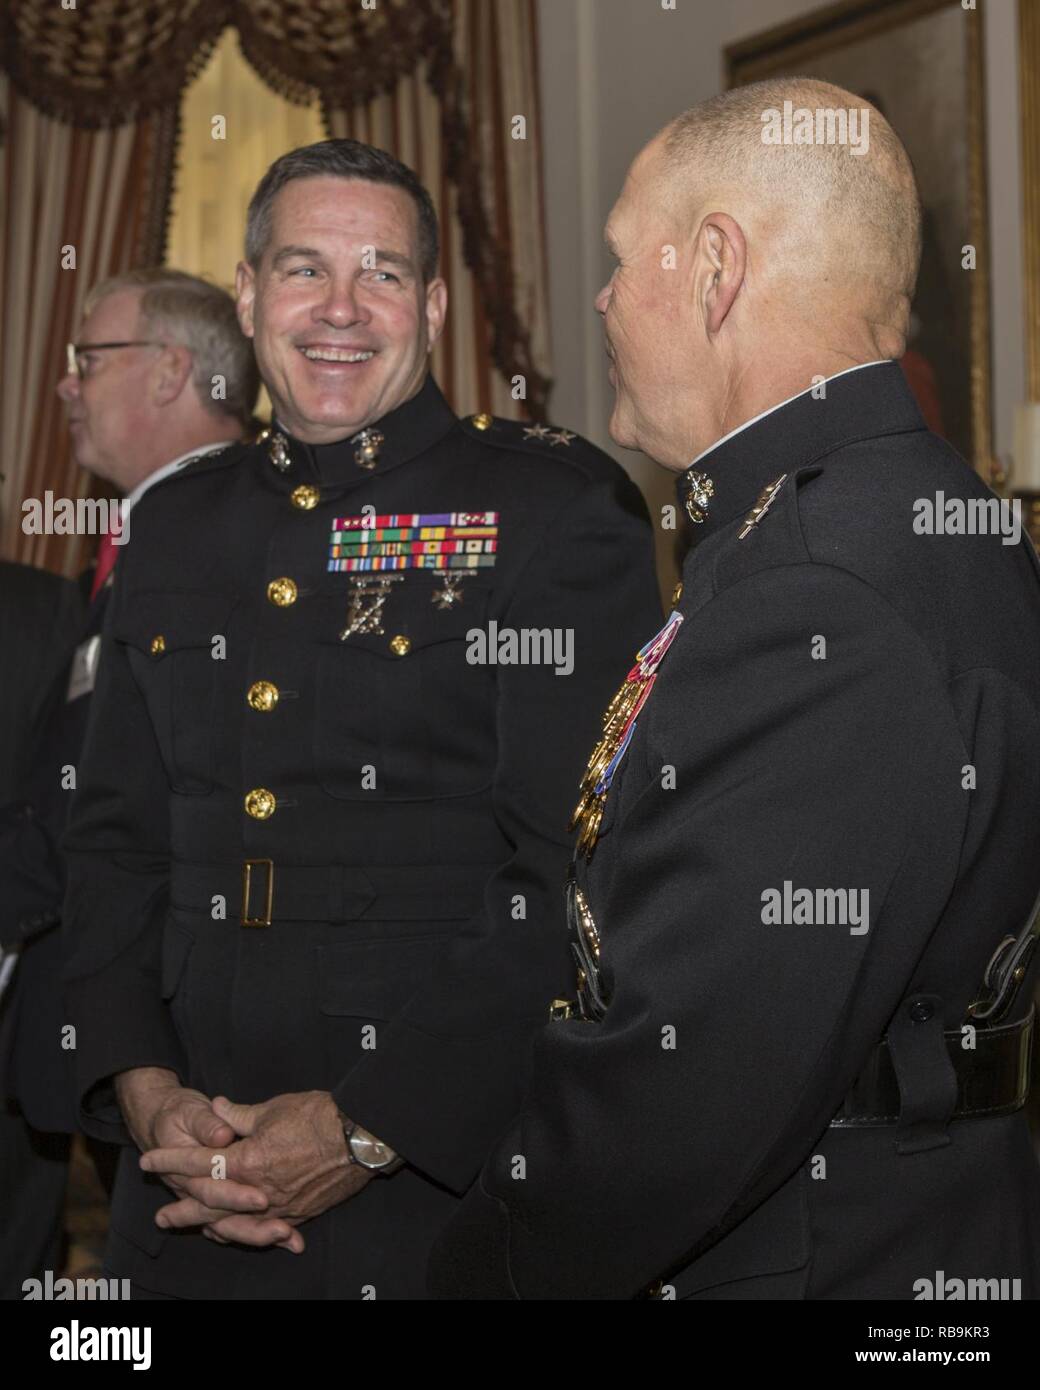 Commandant of the Marine Corps Gen. Robert B. Neller, right, speaks with Maj. Gen. John R. Ewers, Jr., staff judge advocate to the Commandant, before the 2017 Surprise Serenade at the Home of the Commandants, Washington, D.C., Jan. 1, 2017. The Surprise Serenade is a tradition that dates back to the mid-1800’s in which the U.S. Marine Band performs music for the Commandant of the Marine Corps at his home on New Years Day. Stock Photo